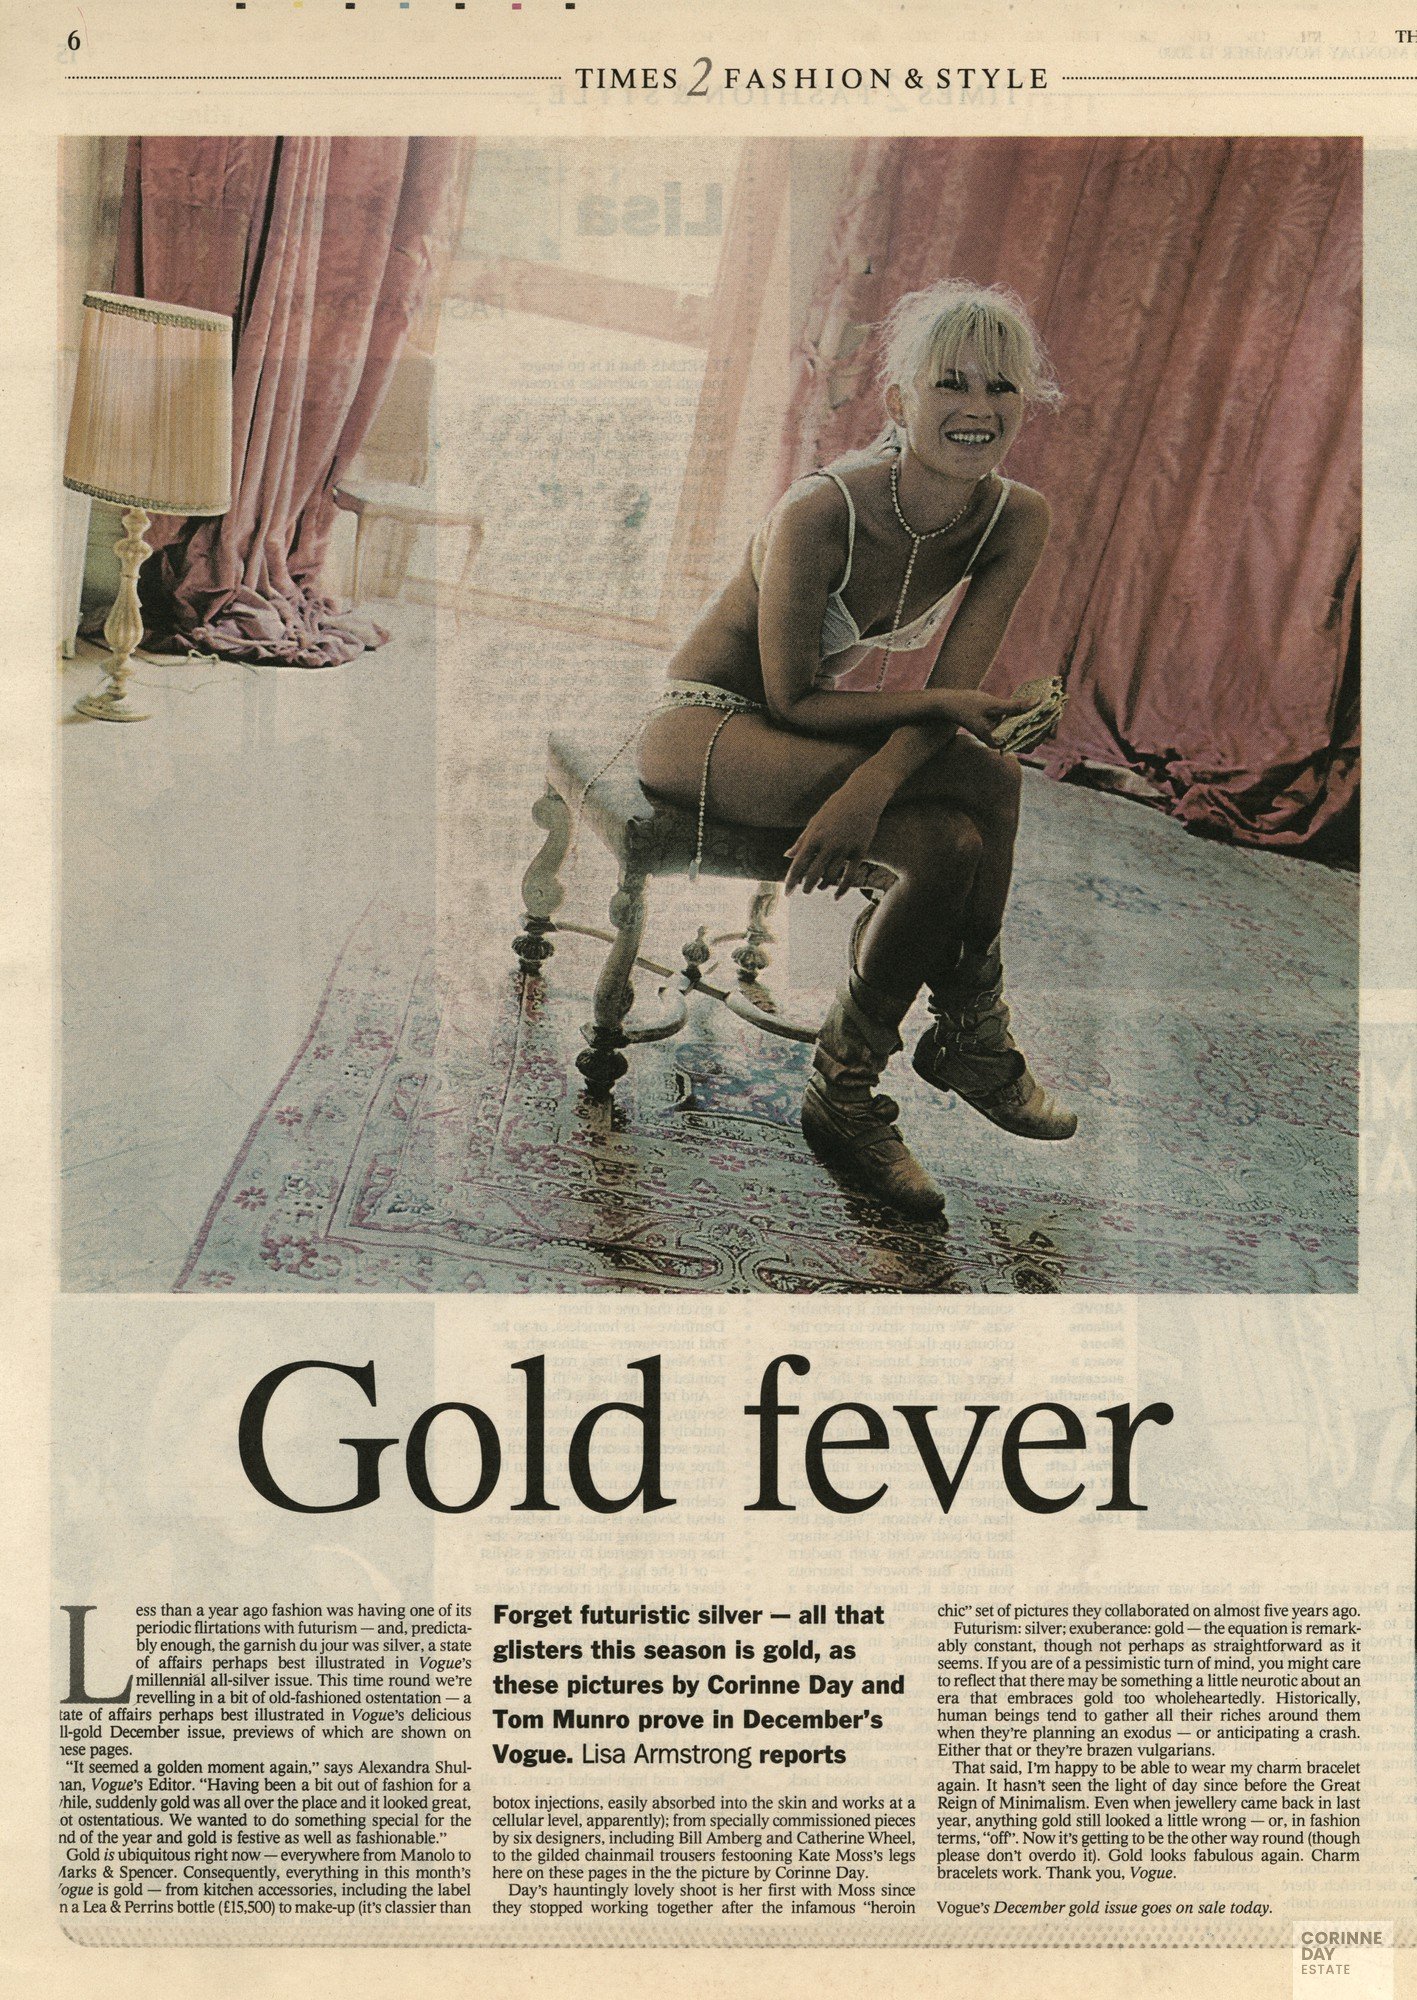 Gold Fever, The Times, Nov 2000 — Image 1 of 1